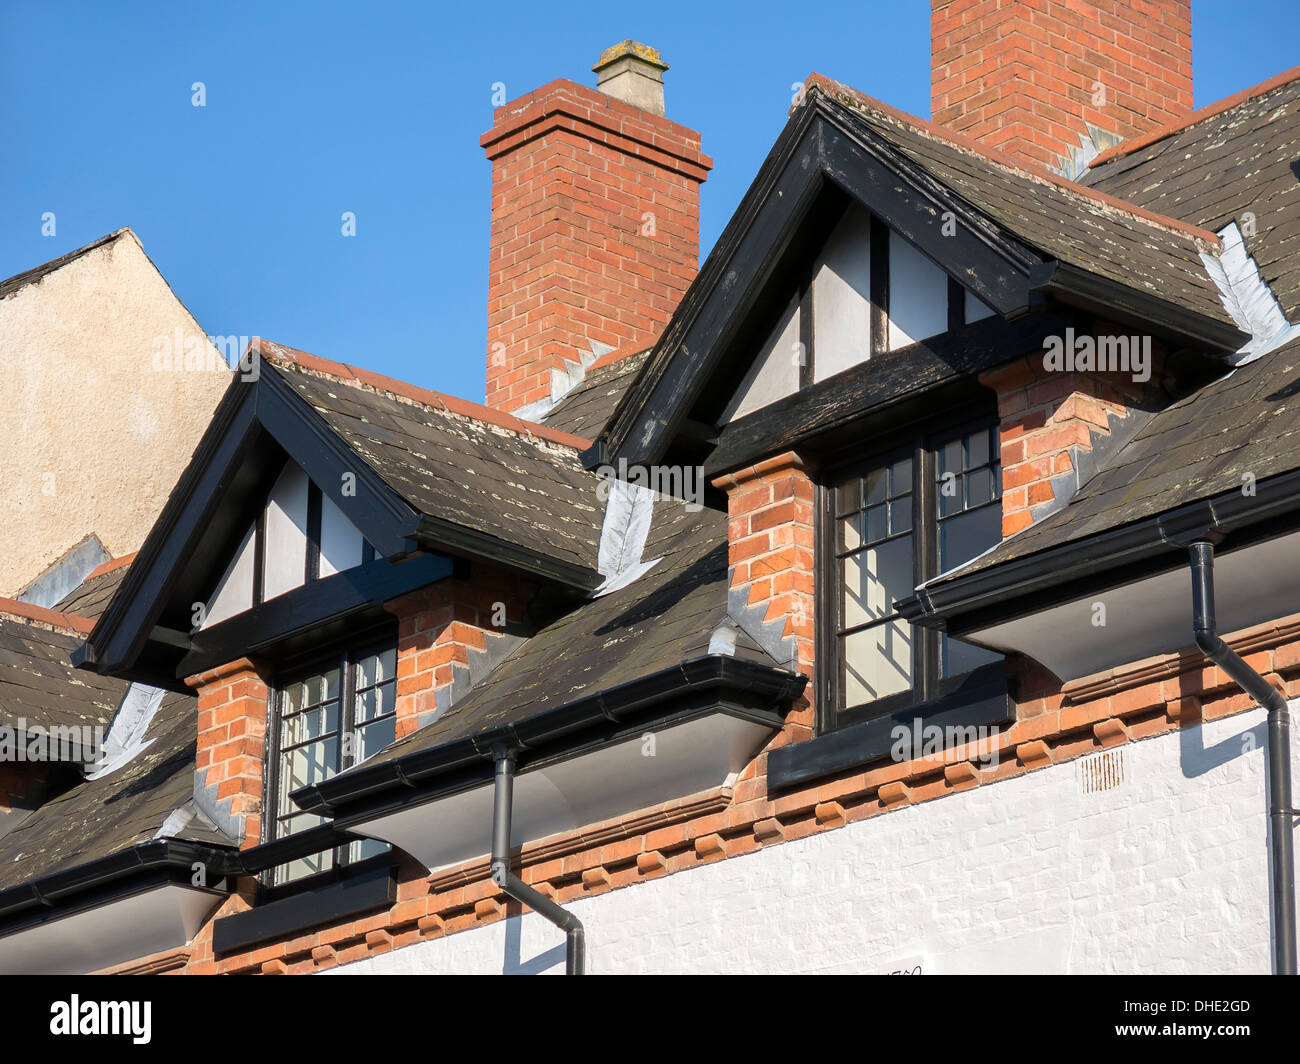 Old dormer windows in slate roof, Melton Mowbray, Leicestershire, England, UK. Stock Photo